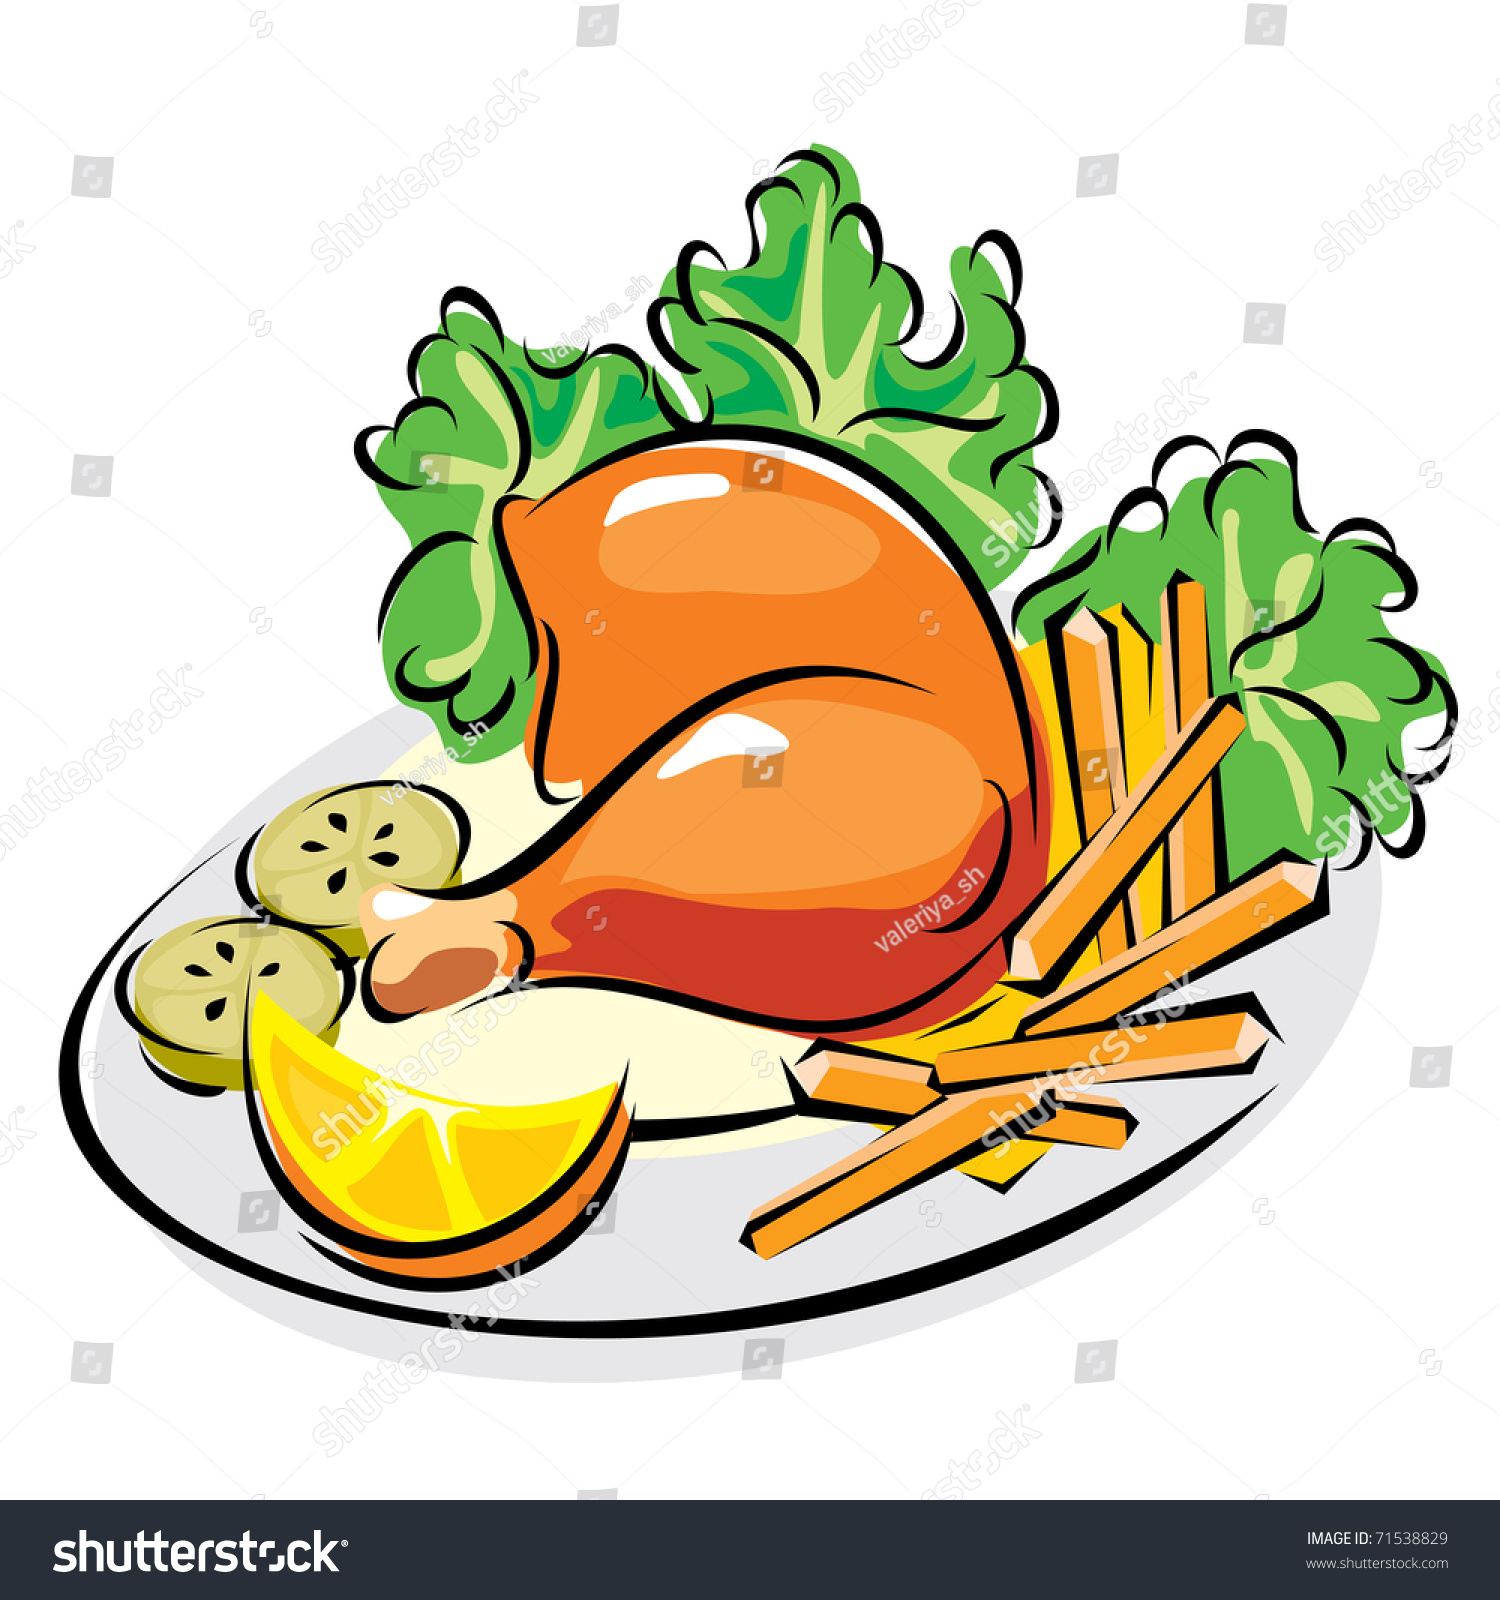 chicken meal clipart - photo #3